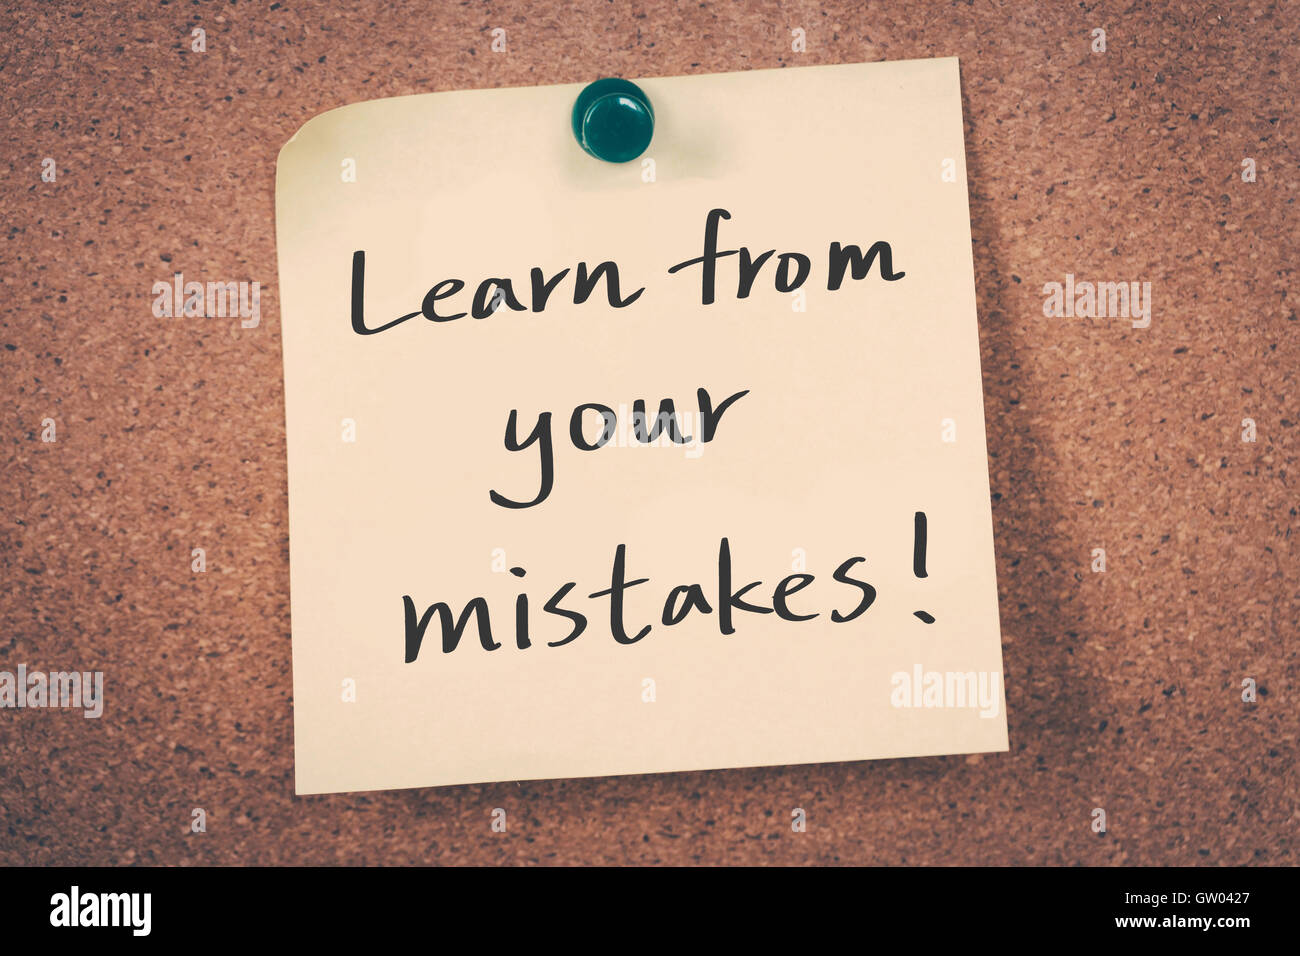 Learn from your mistakes Stock Photo